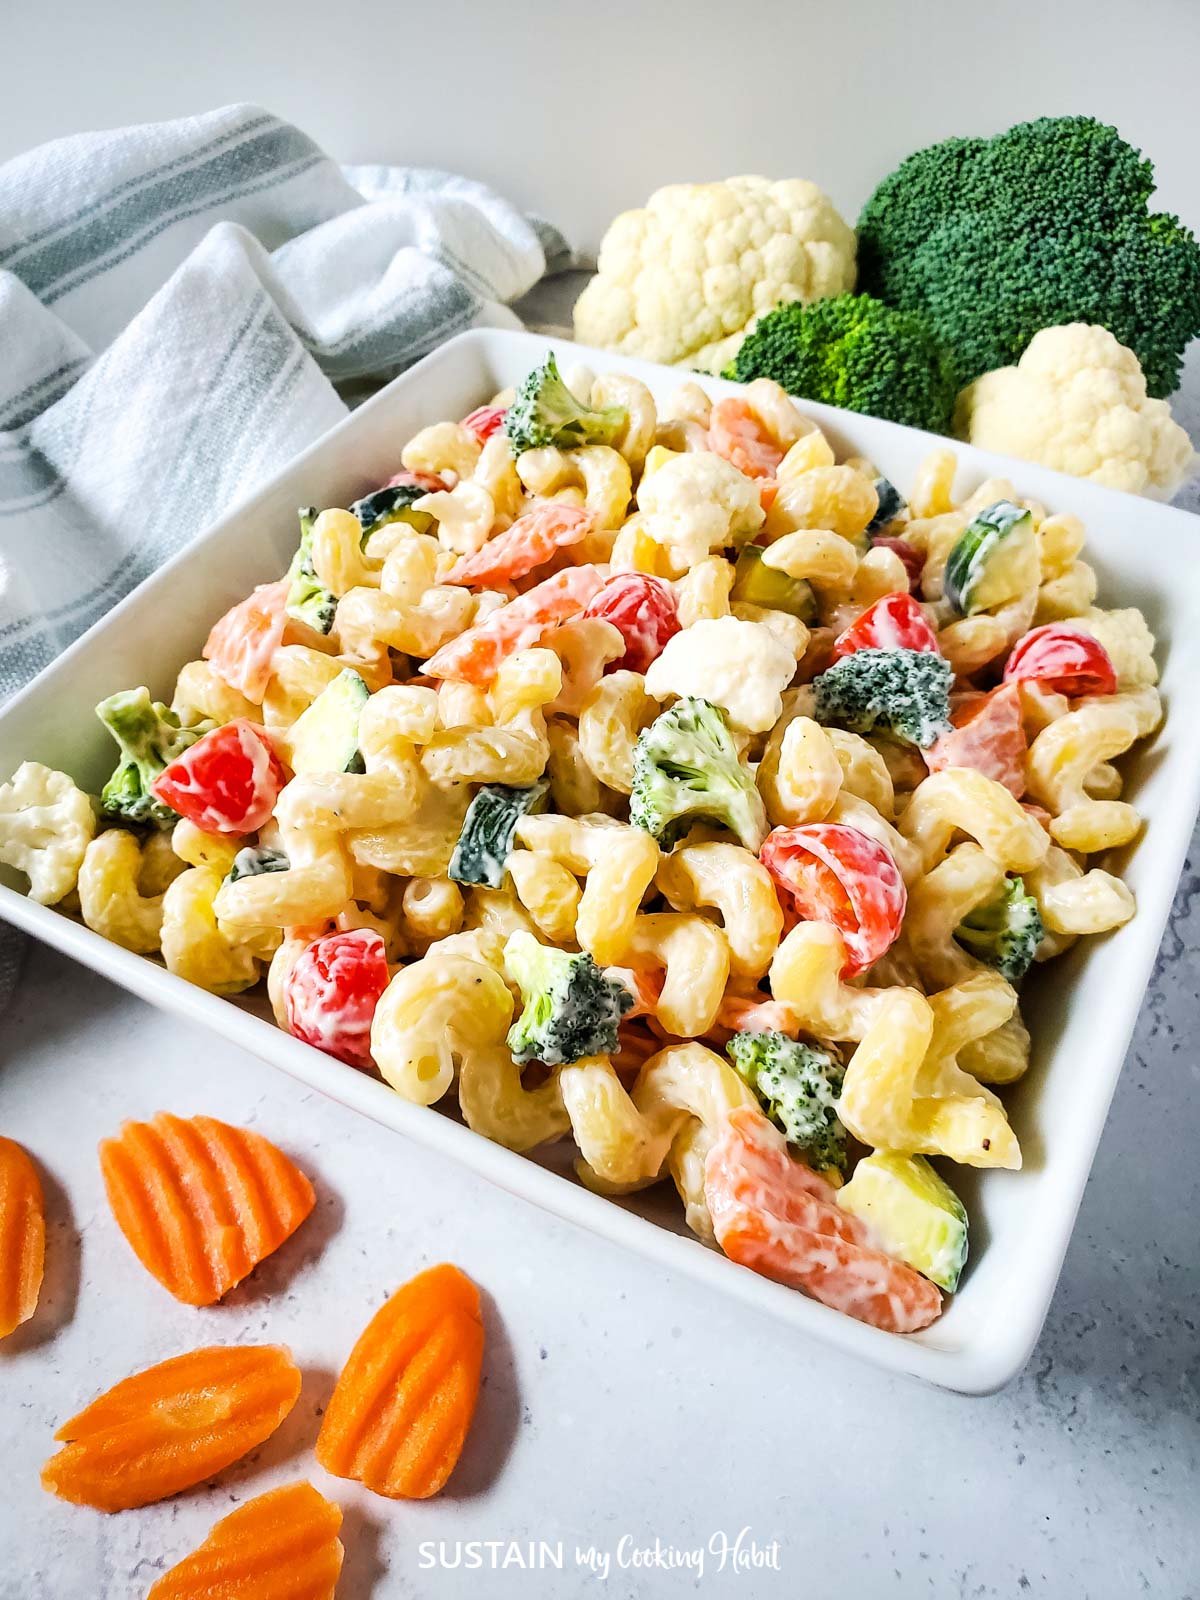 Creamy pasta salad loaded with veggies in a serving dish.